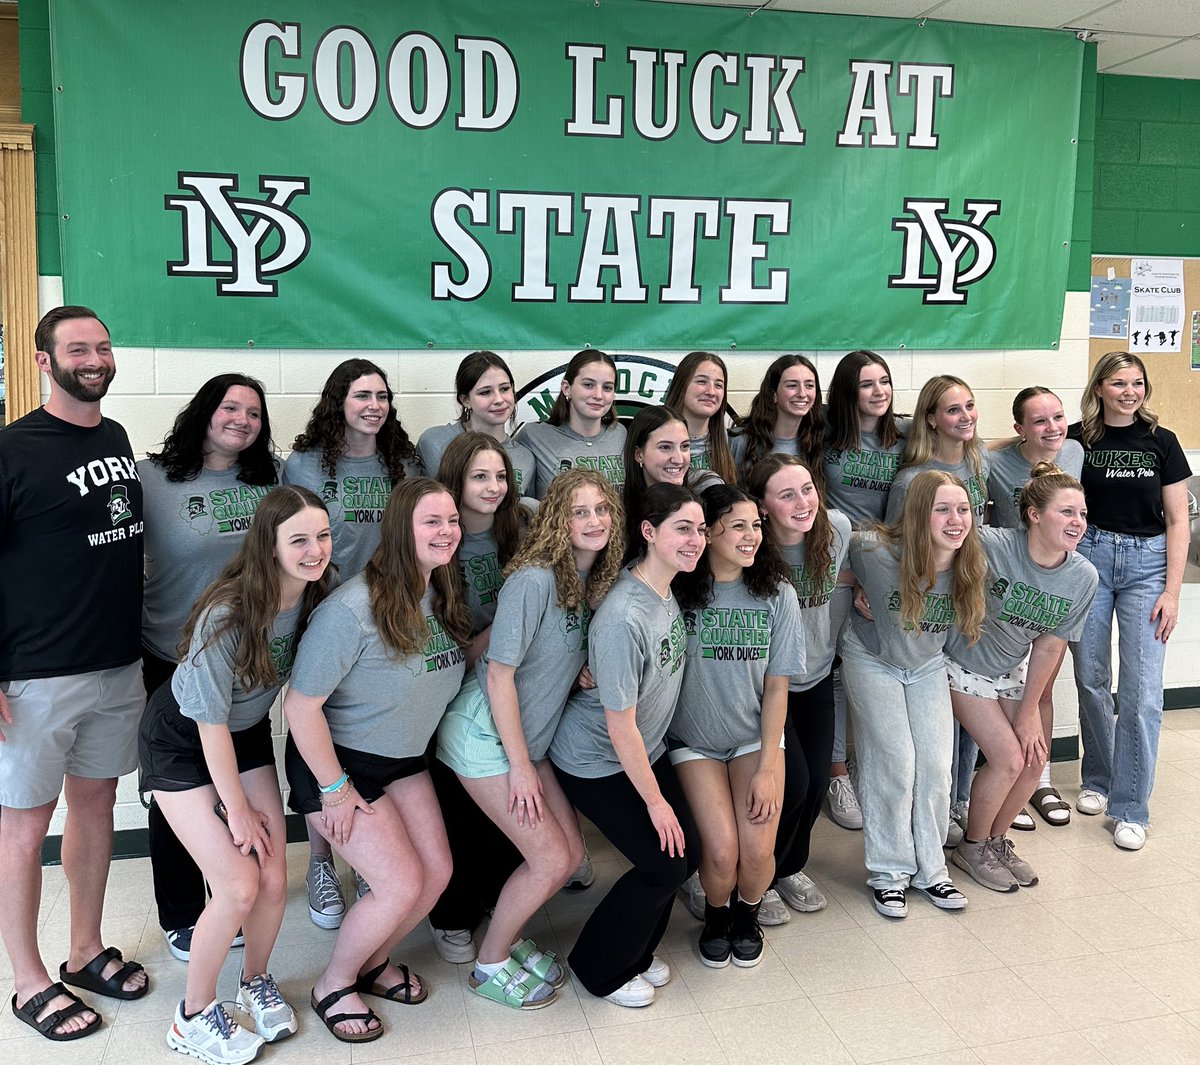 Girls’ Water Polo State Send Off Good luck at State! GO DUKES!